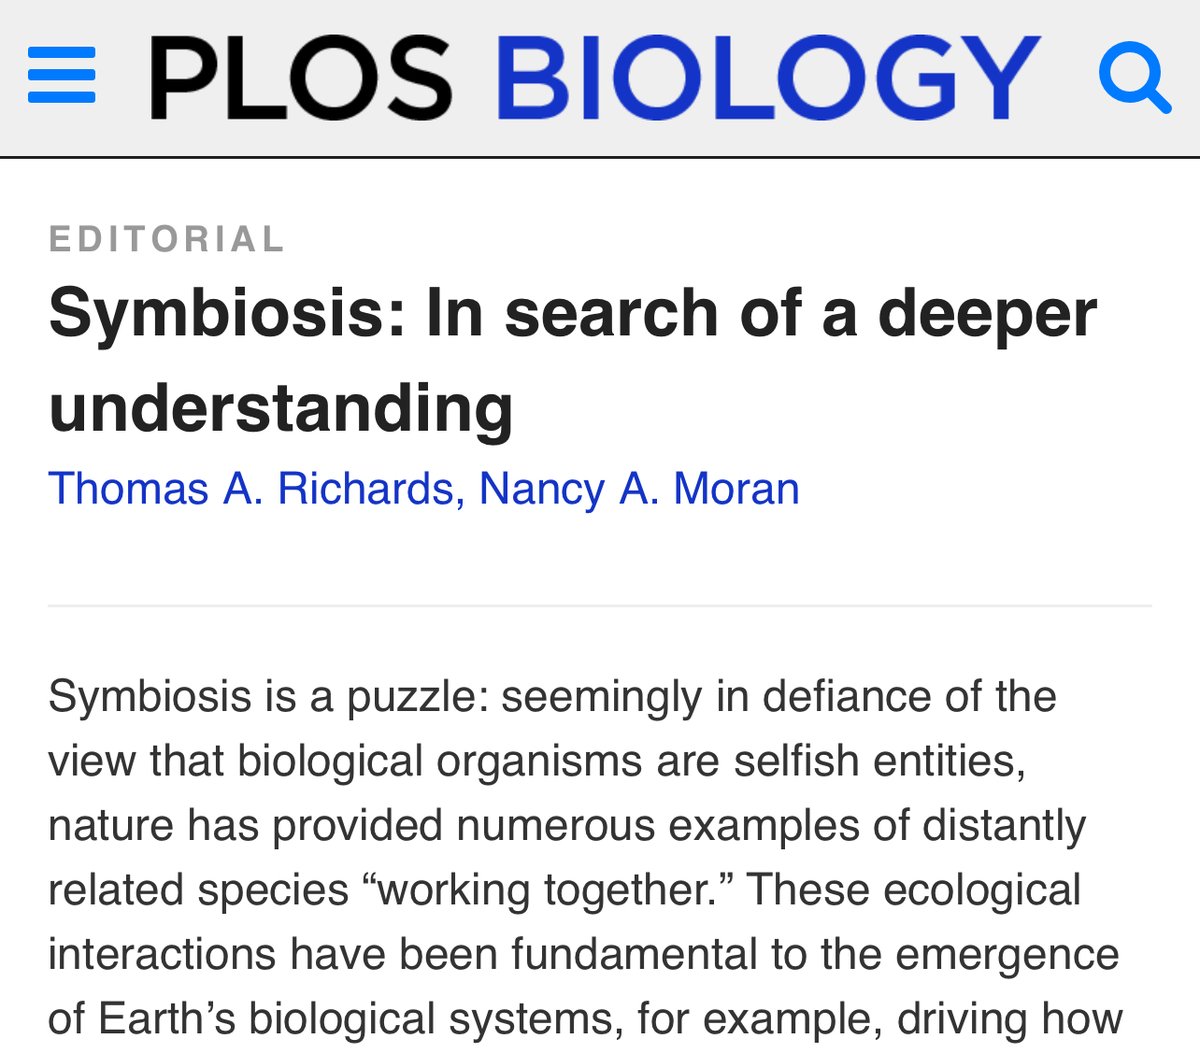 “Symbiosis has generated radical evolutionary outcomes that have shaped the tree of life” 👏🏻 Interesting piece in @PLOSBiology on how symbiotic interactions between species, including plants and microbes, evolve: bit.ly/3Qopyqq